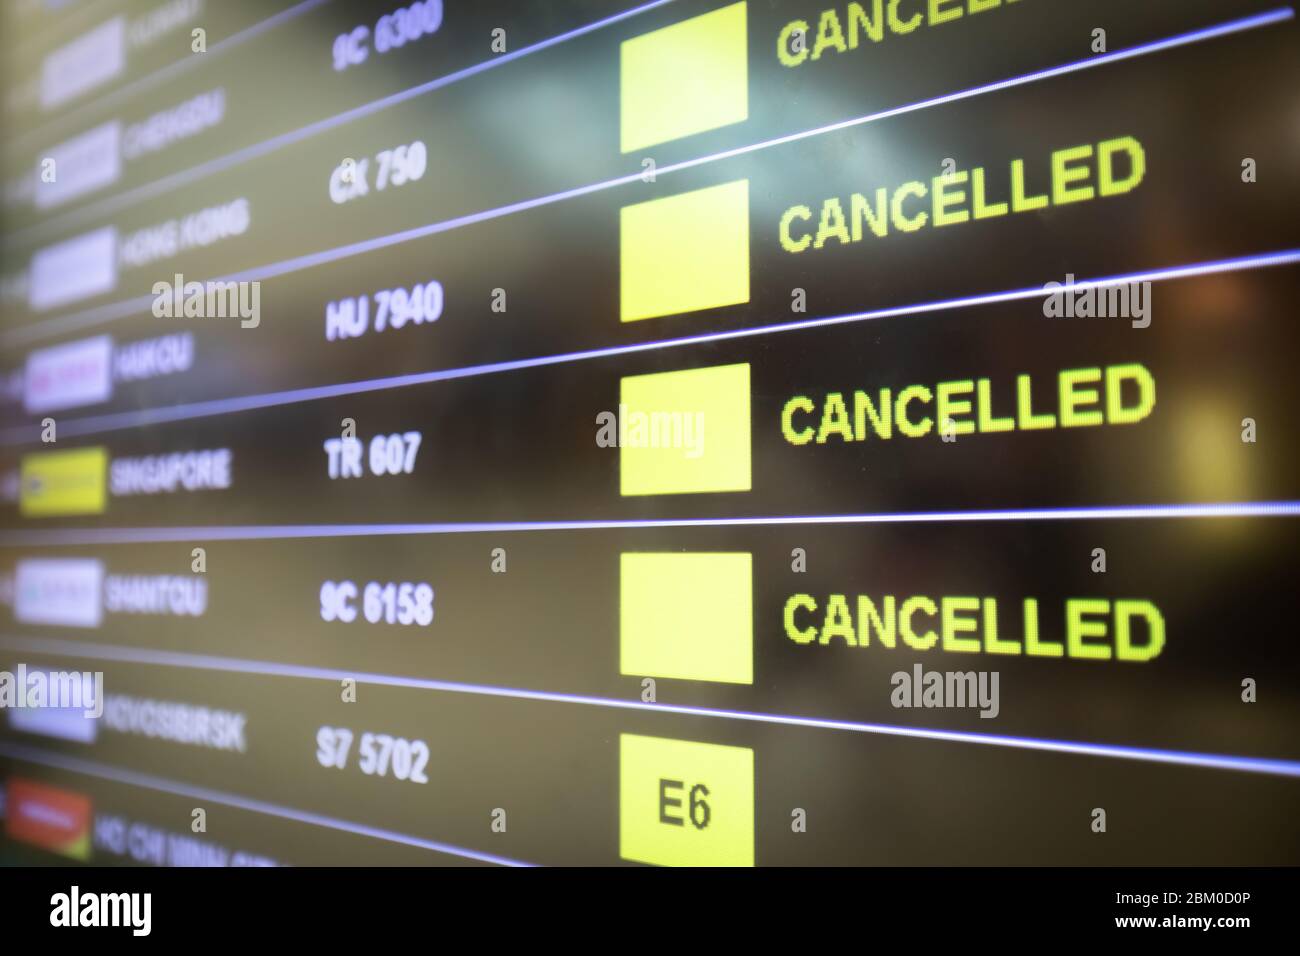 Flights cancelled and delayed on airport departure board due to covid-19 pandemic. Coronavirus causing disruption in air transport with airlines cance Stock Photo